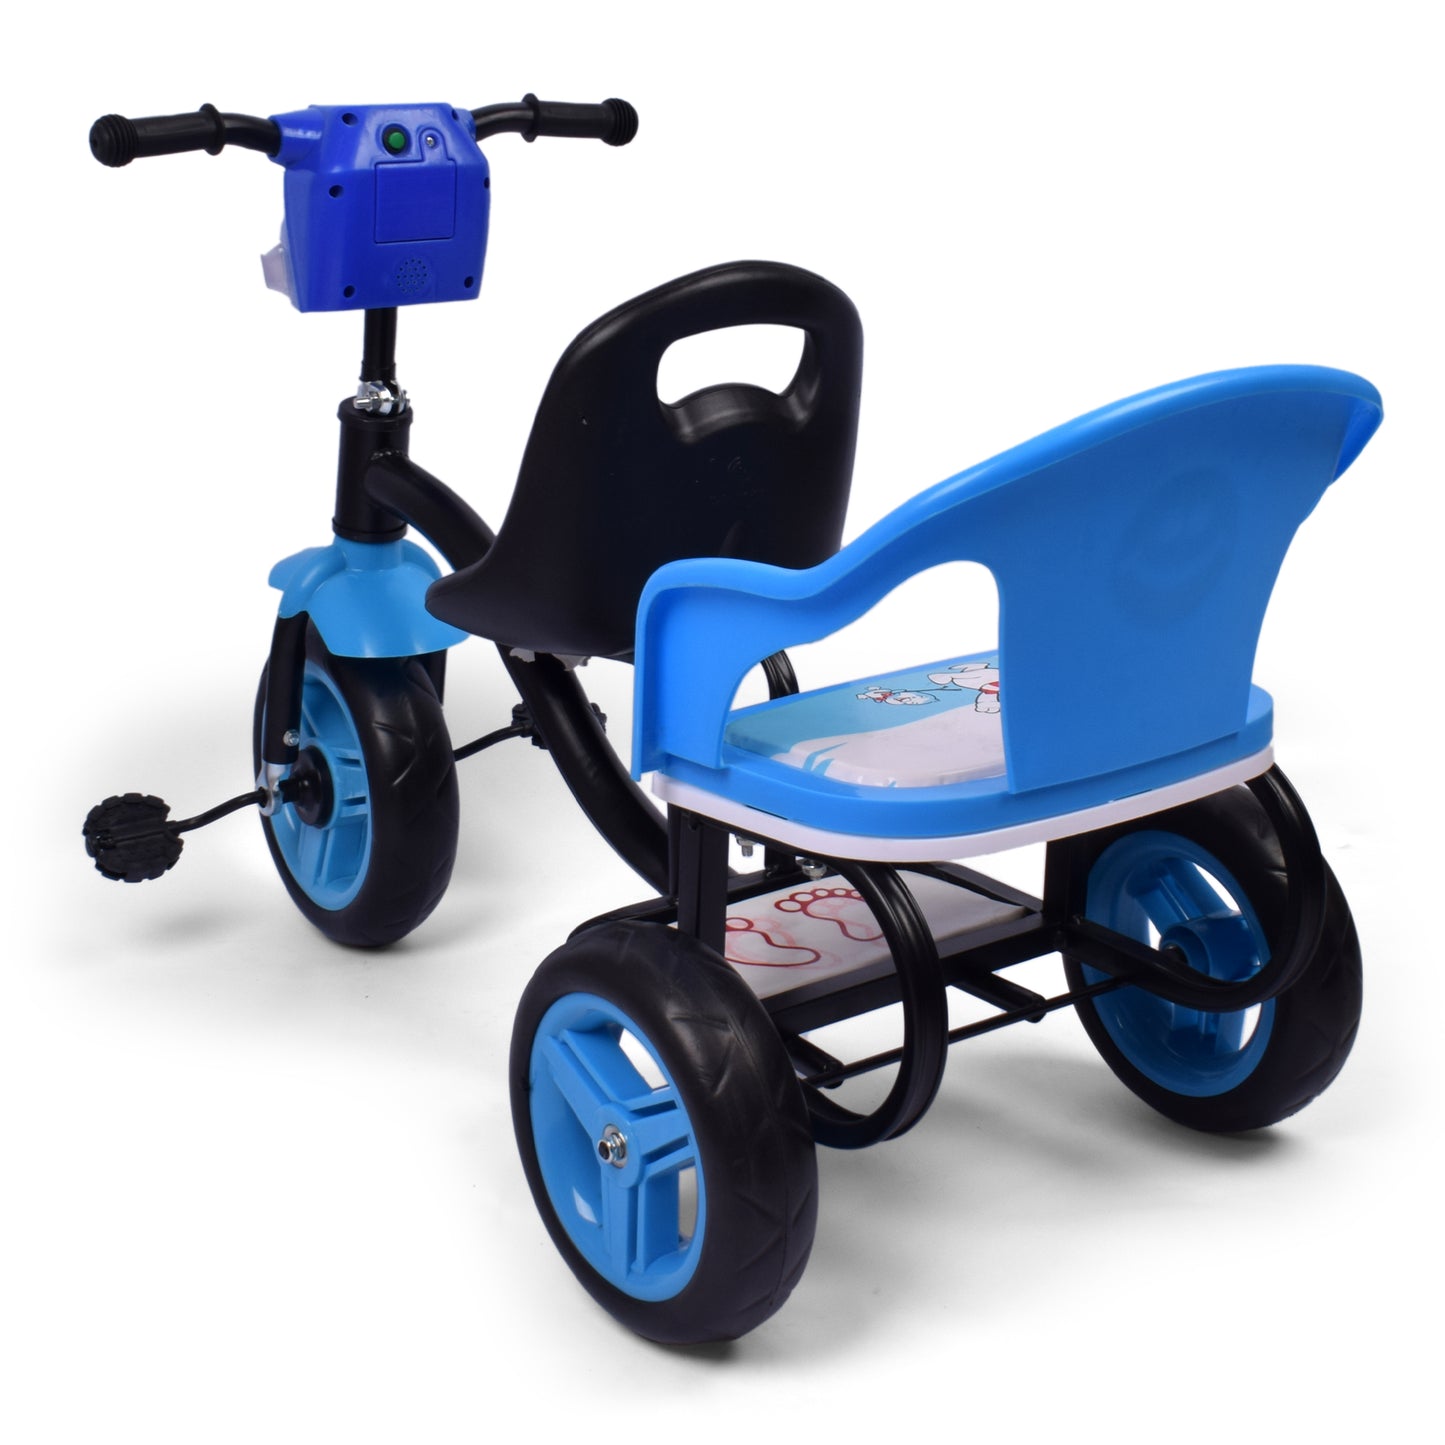 2 Kids Tricycle